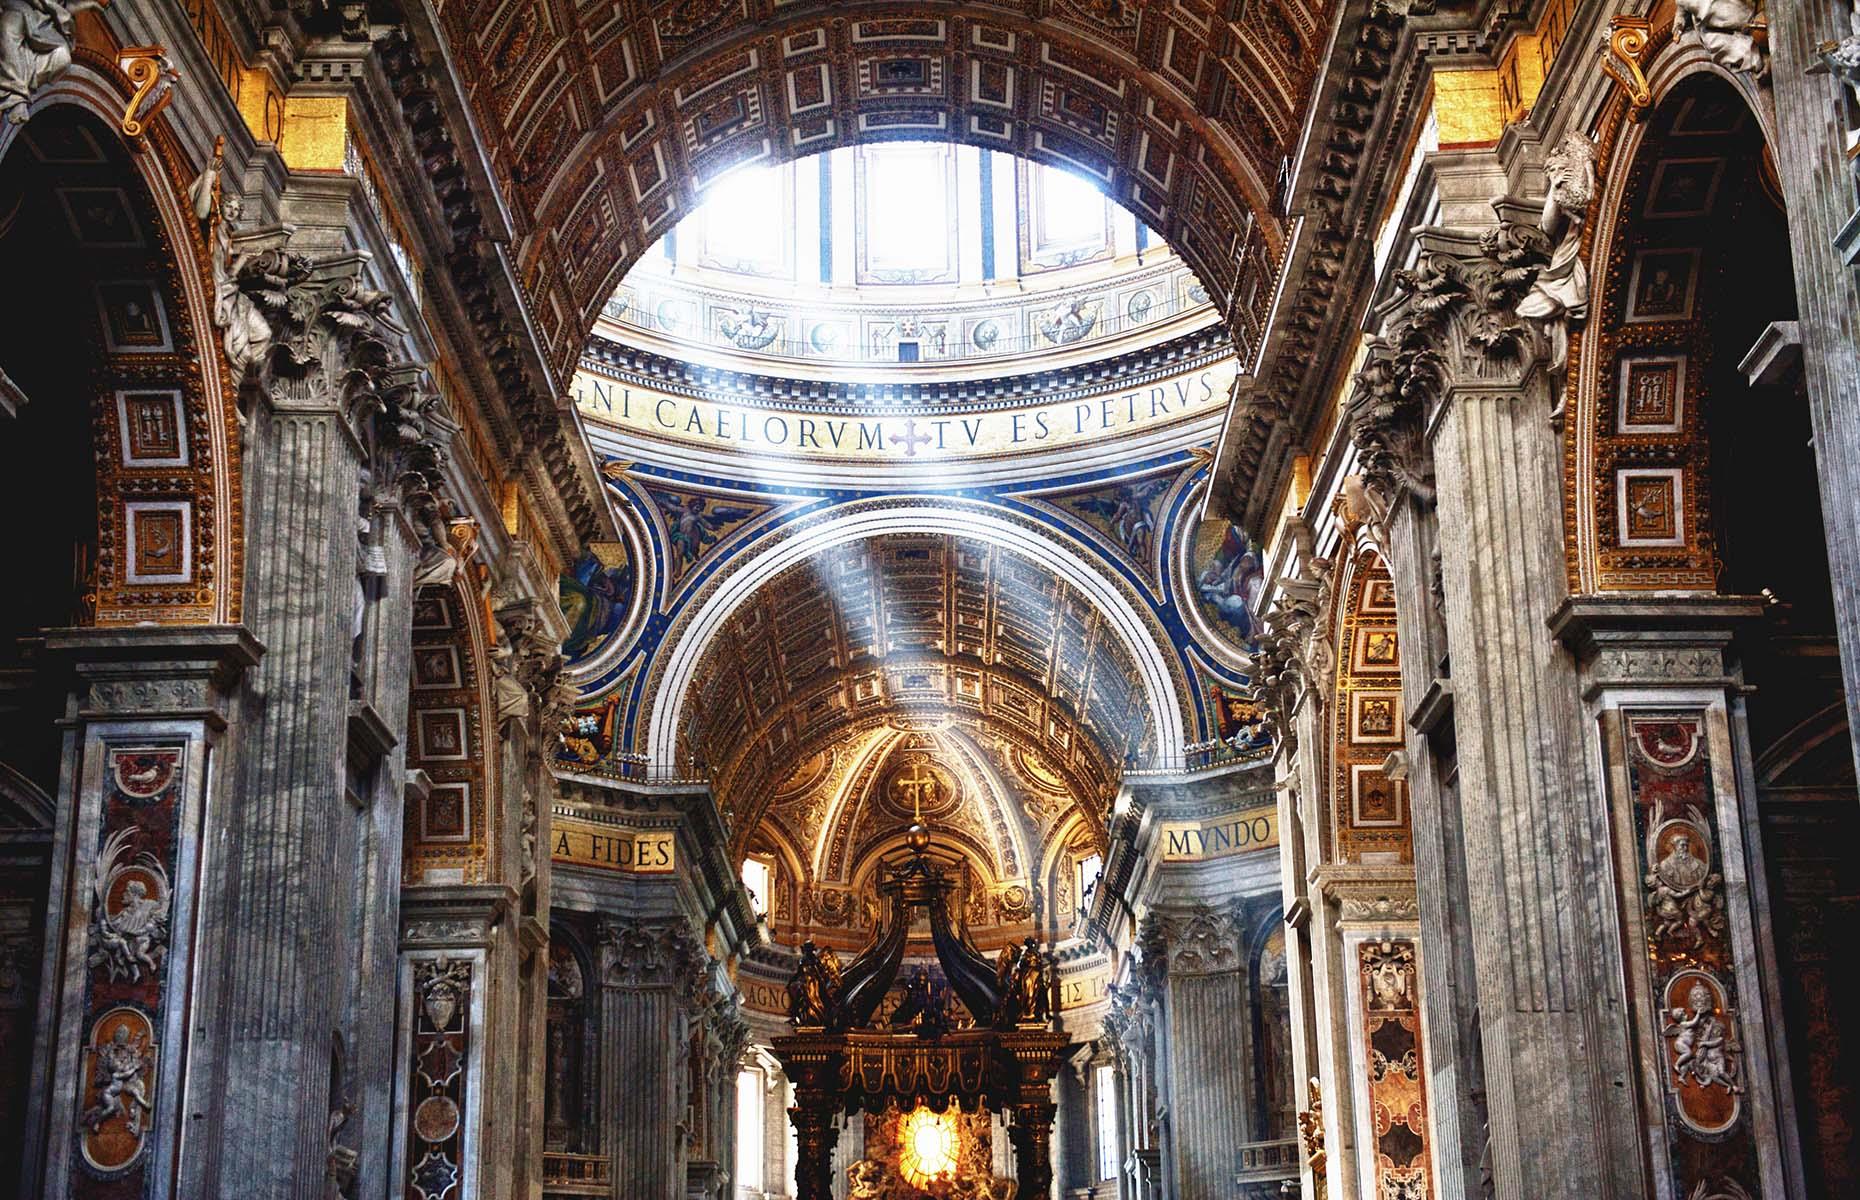 <p>St Peter’s is regarded as the greatest building of the Renaissance. It was started in 1506, consecrated 120 years later, and counted Bramante, Raphael and Michelangelo amongst its chief architects. Michelangelo designed the basilica’s breathtaking dome, and his sculpture, <em>Pietà</em>, is just one of the major artworks found in the cavernous, 3.7-acre (15,000 sqm) interior. As the universal headquarters of the Catholic church, it is visited by 10 million people each year, many of whom come to hear the Pope preside over a liturgy. <strong>Score: 7.03</strong></p>